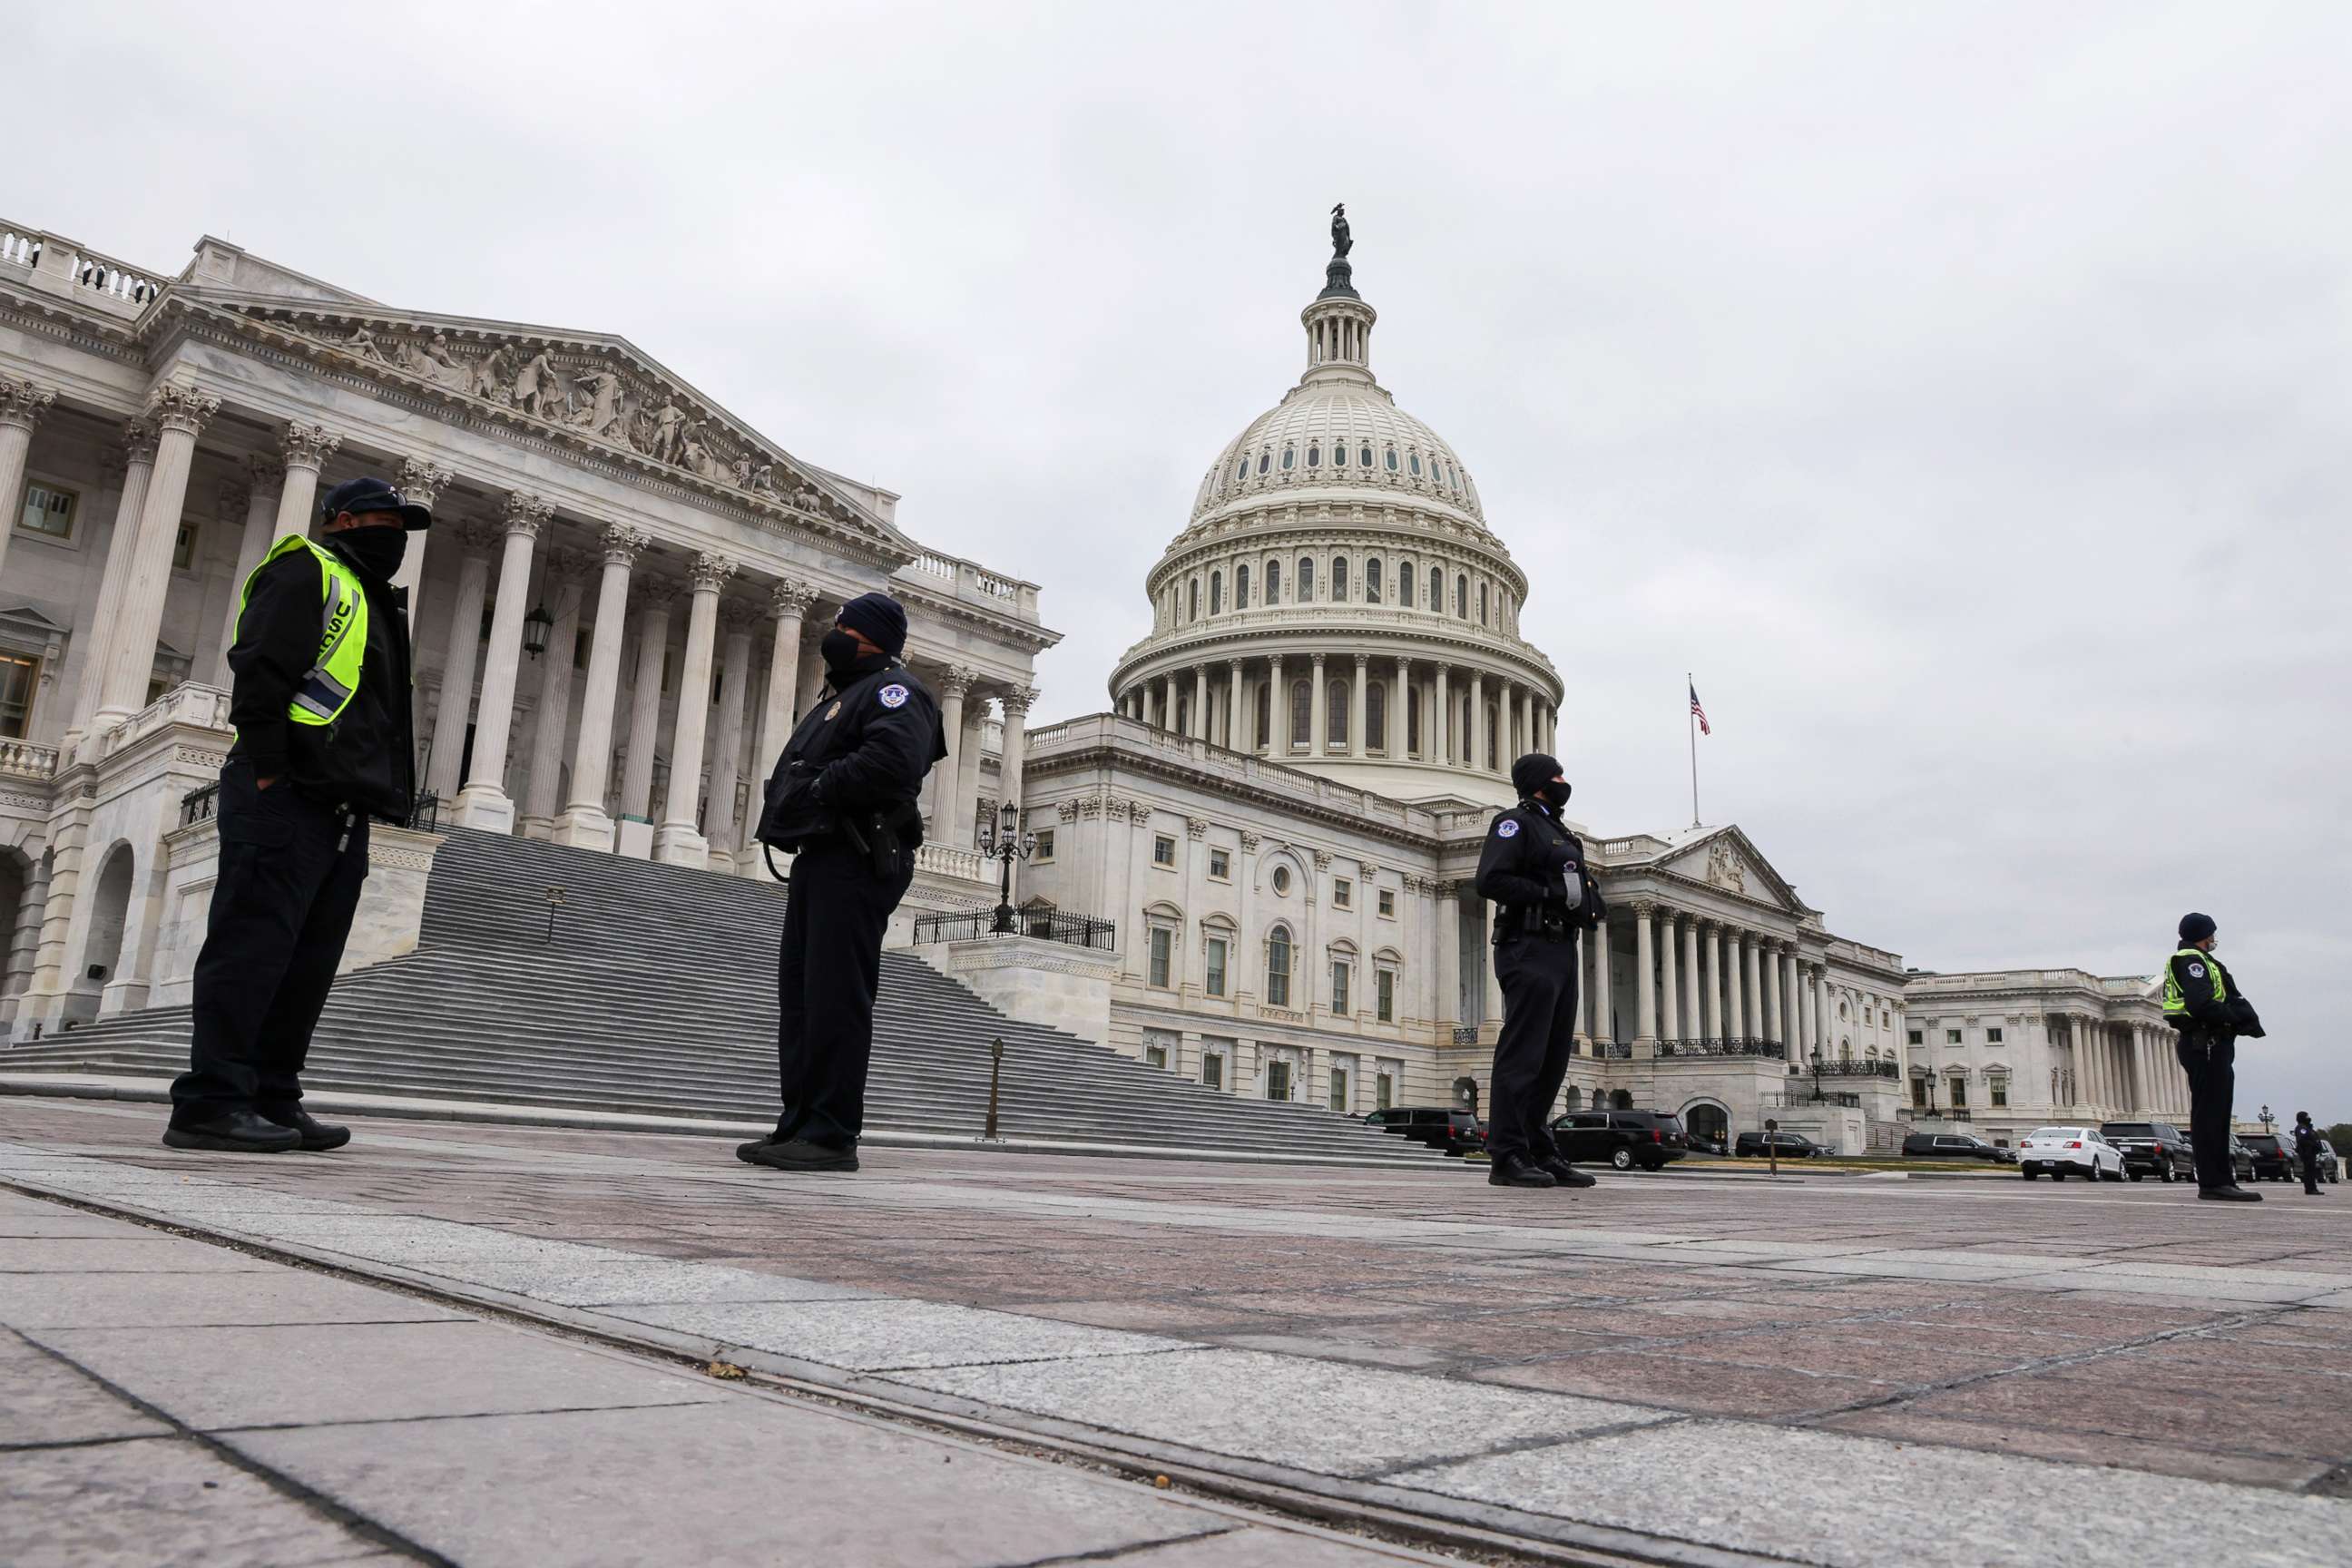 PHOTO: U.S. Capitol Police stand guard on a plaza surrounding the Capitol before Congress meets to certify the electoral college vote for President-elect Joe Biden in Washington, D.C., Jan. 6, 2021.